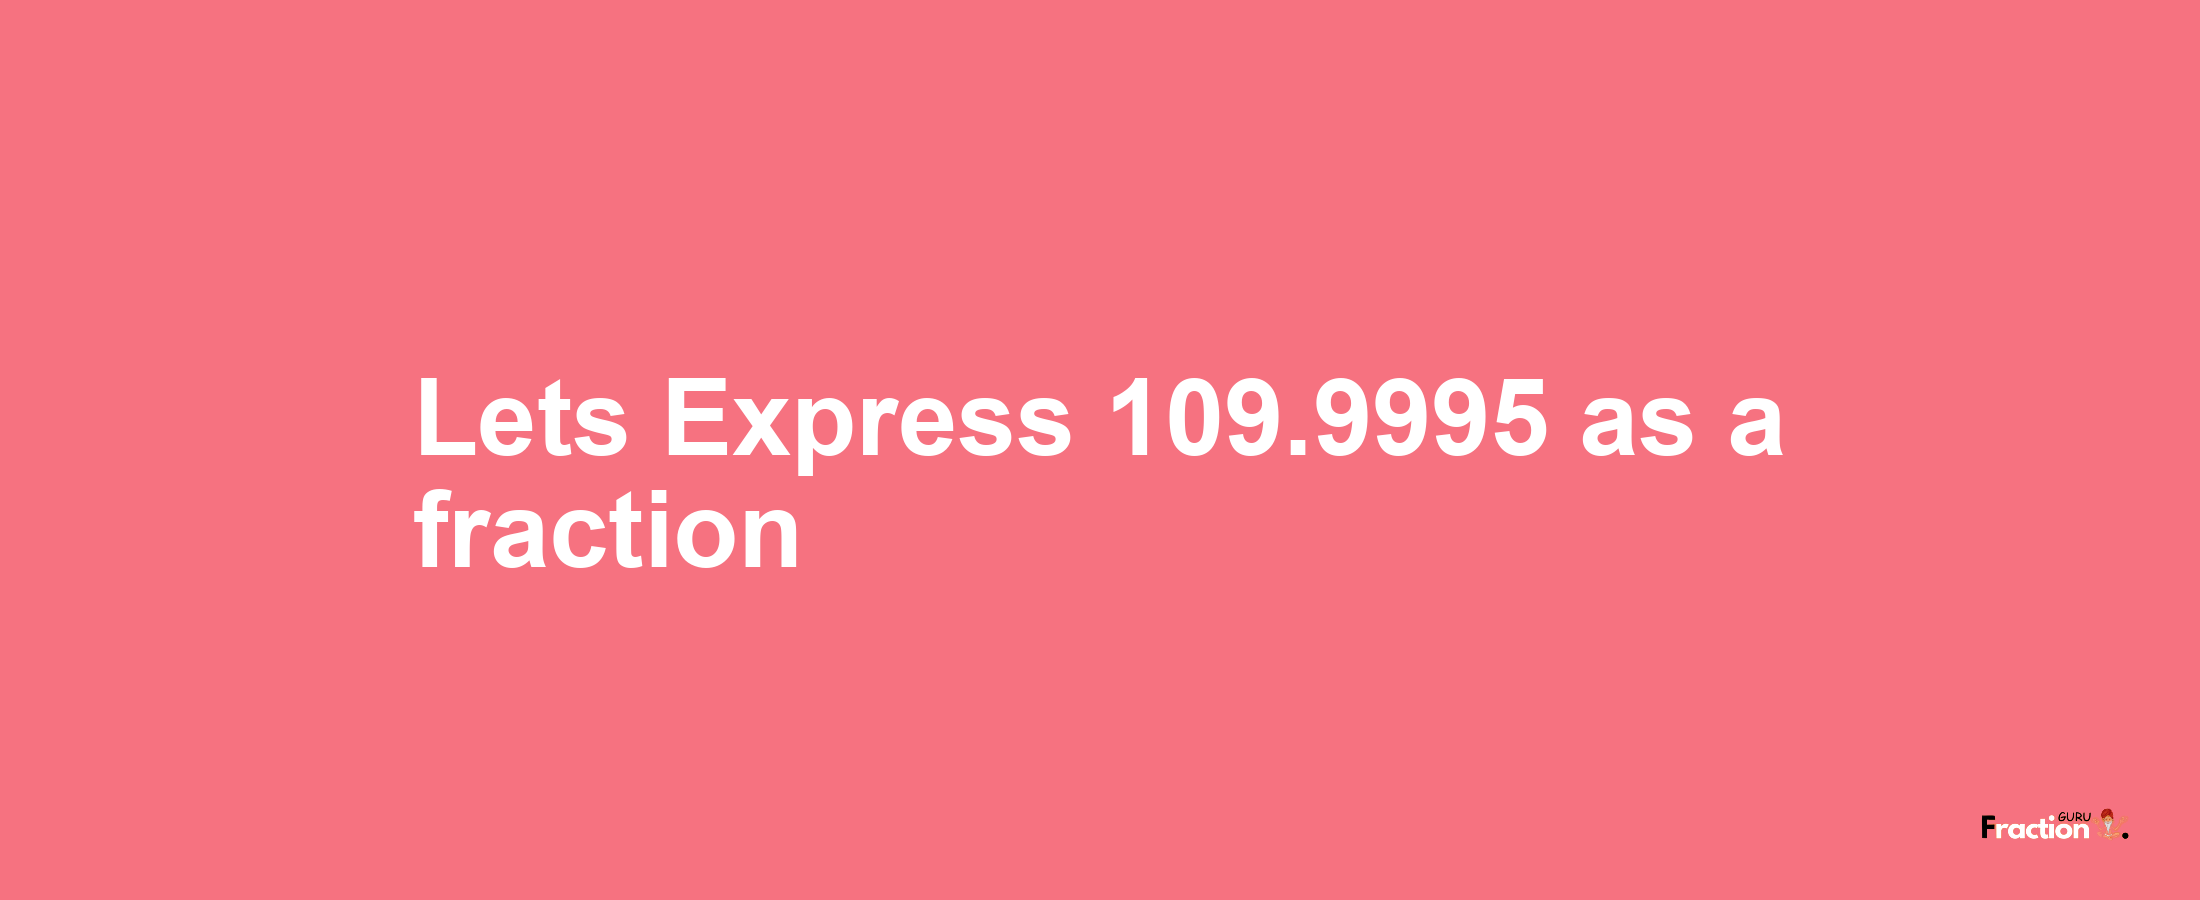 Lets Express 109.9995 as afraction